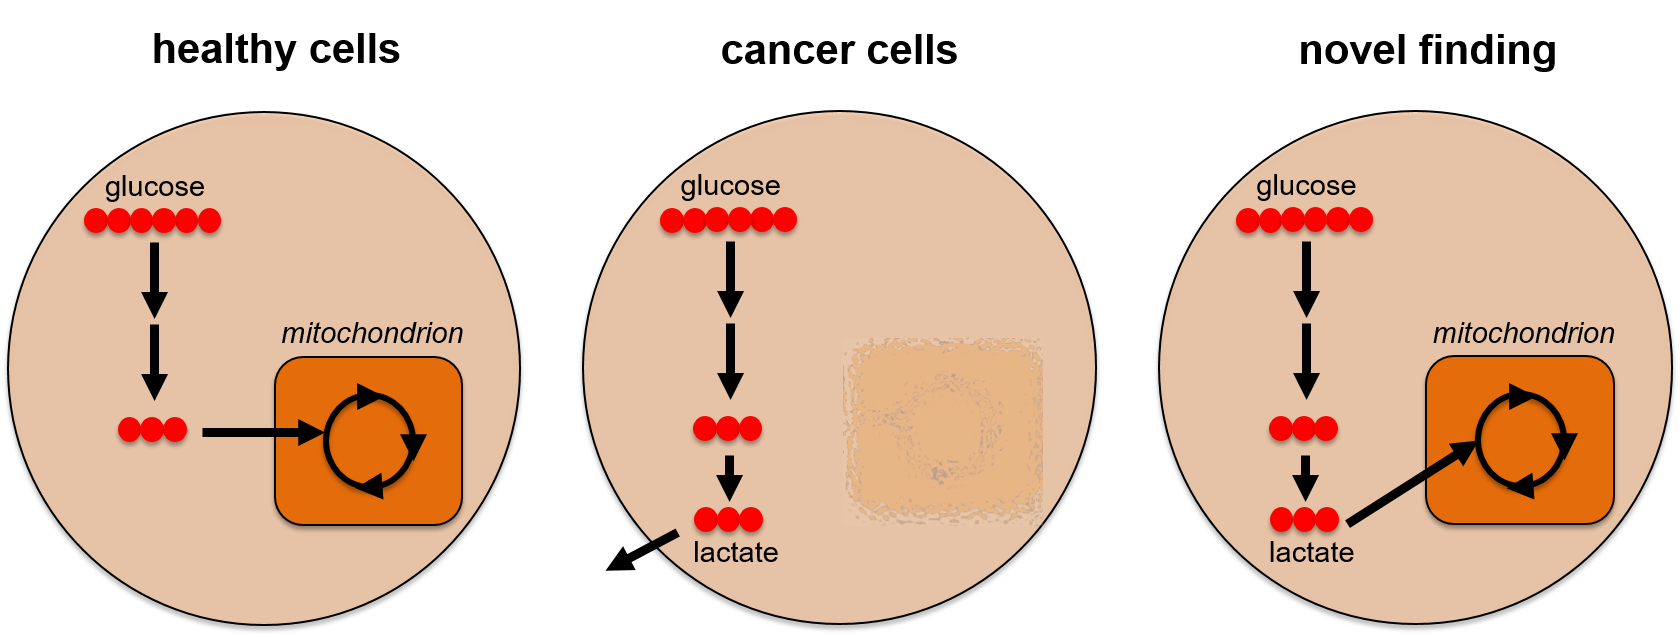 Glucose is metabolized to lactate in most cancer cells